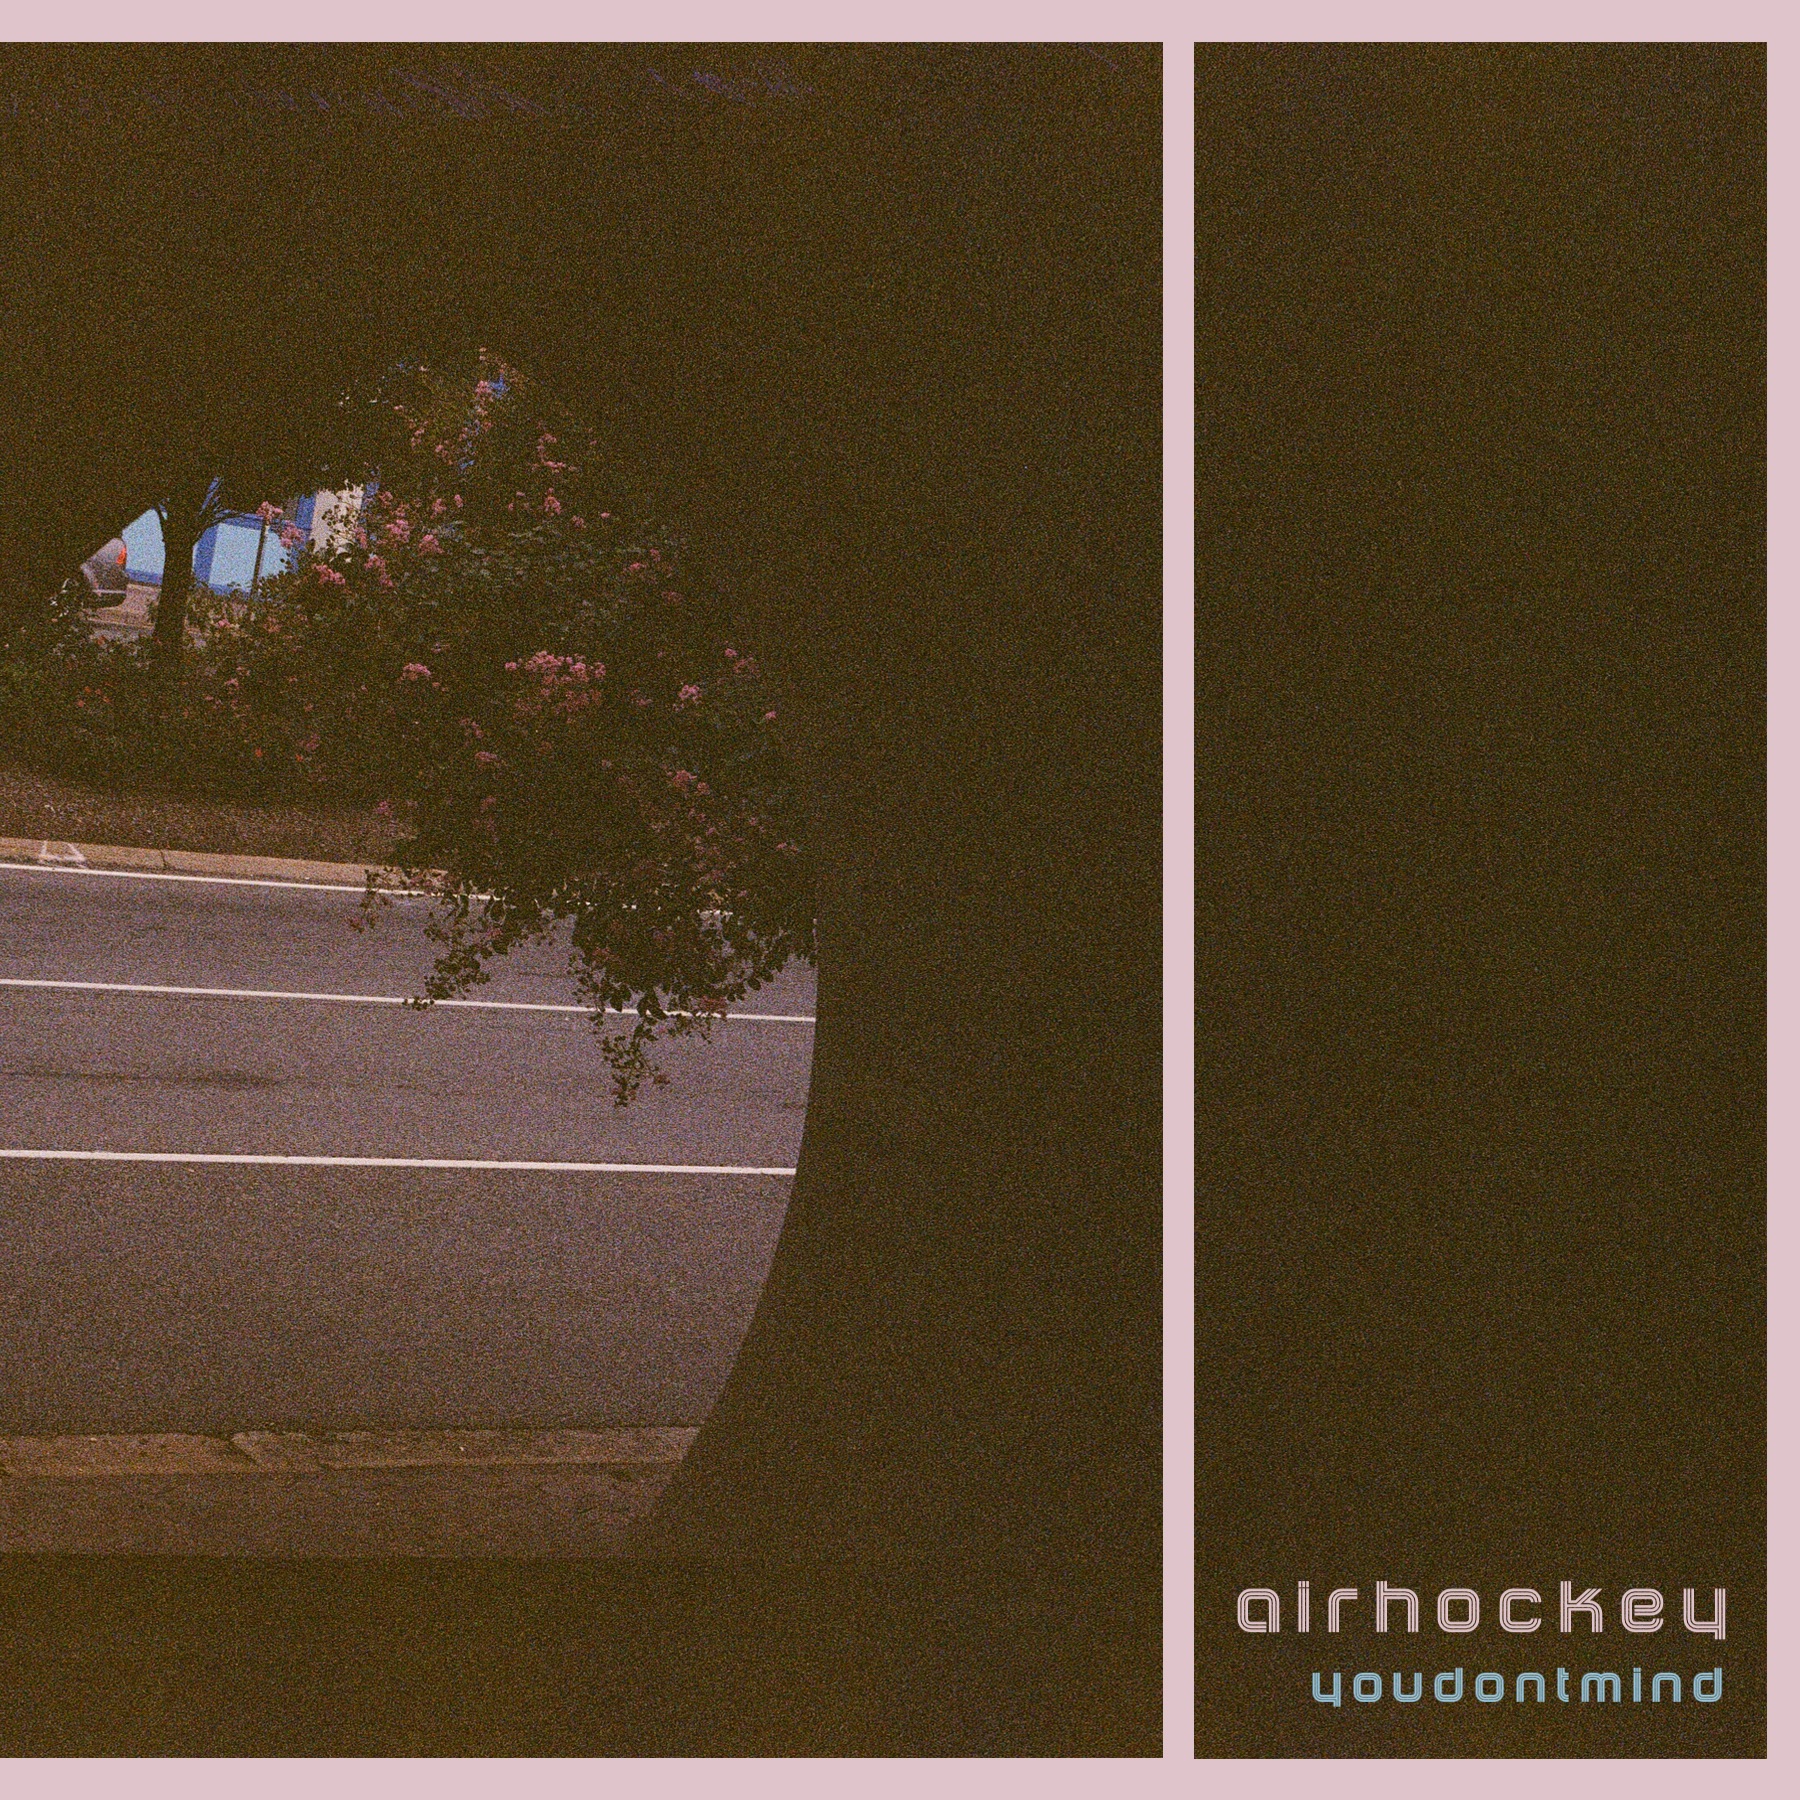 airhockey – “you don’t mind”